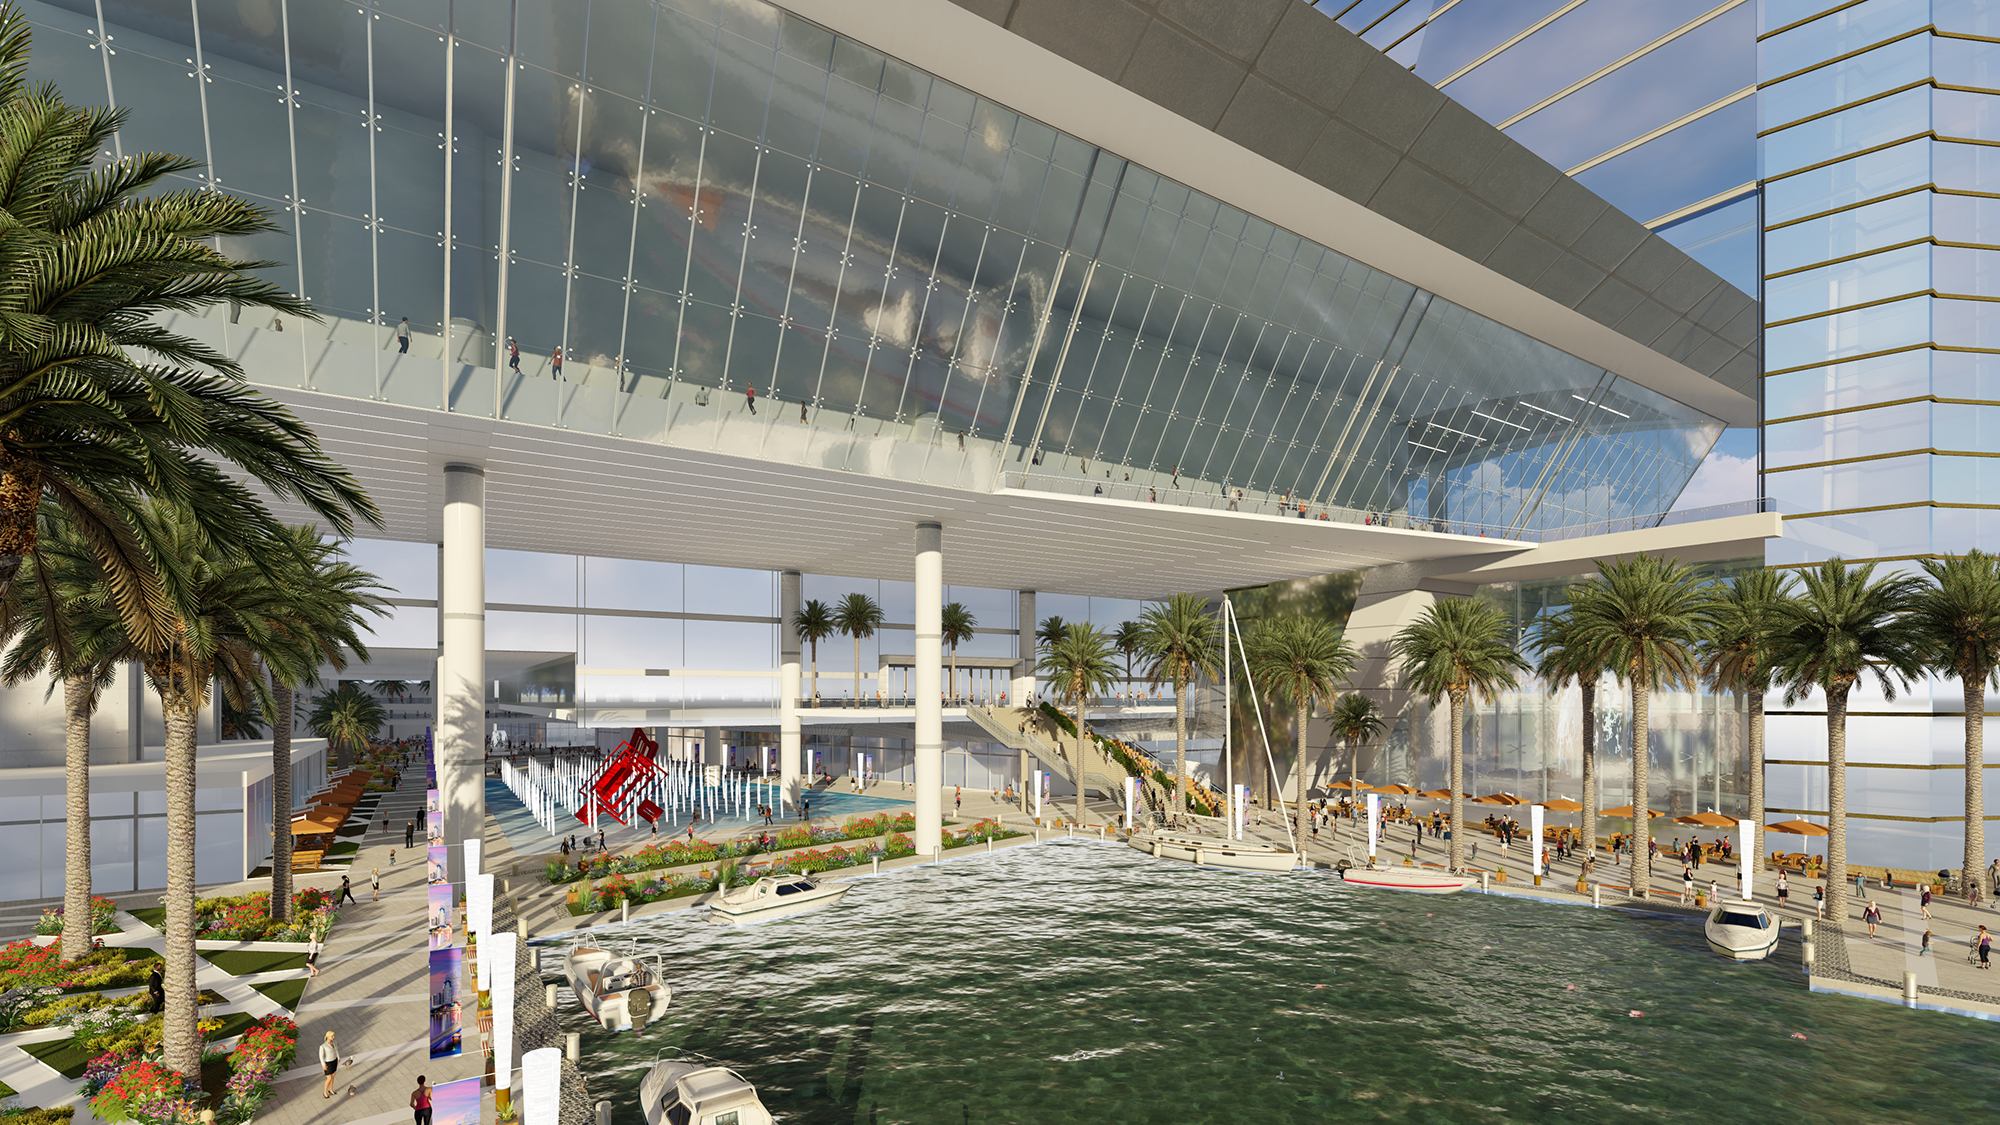 A recreation area and interactive fountain planned at the convention center.